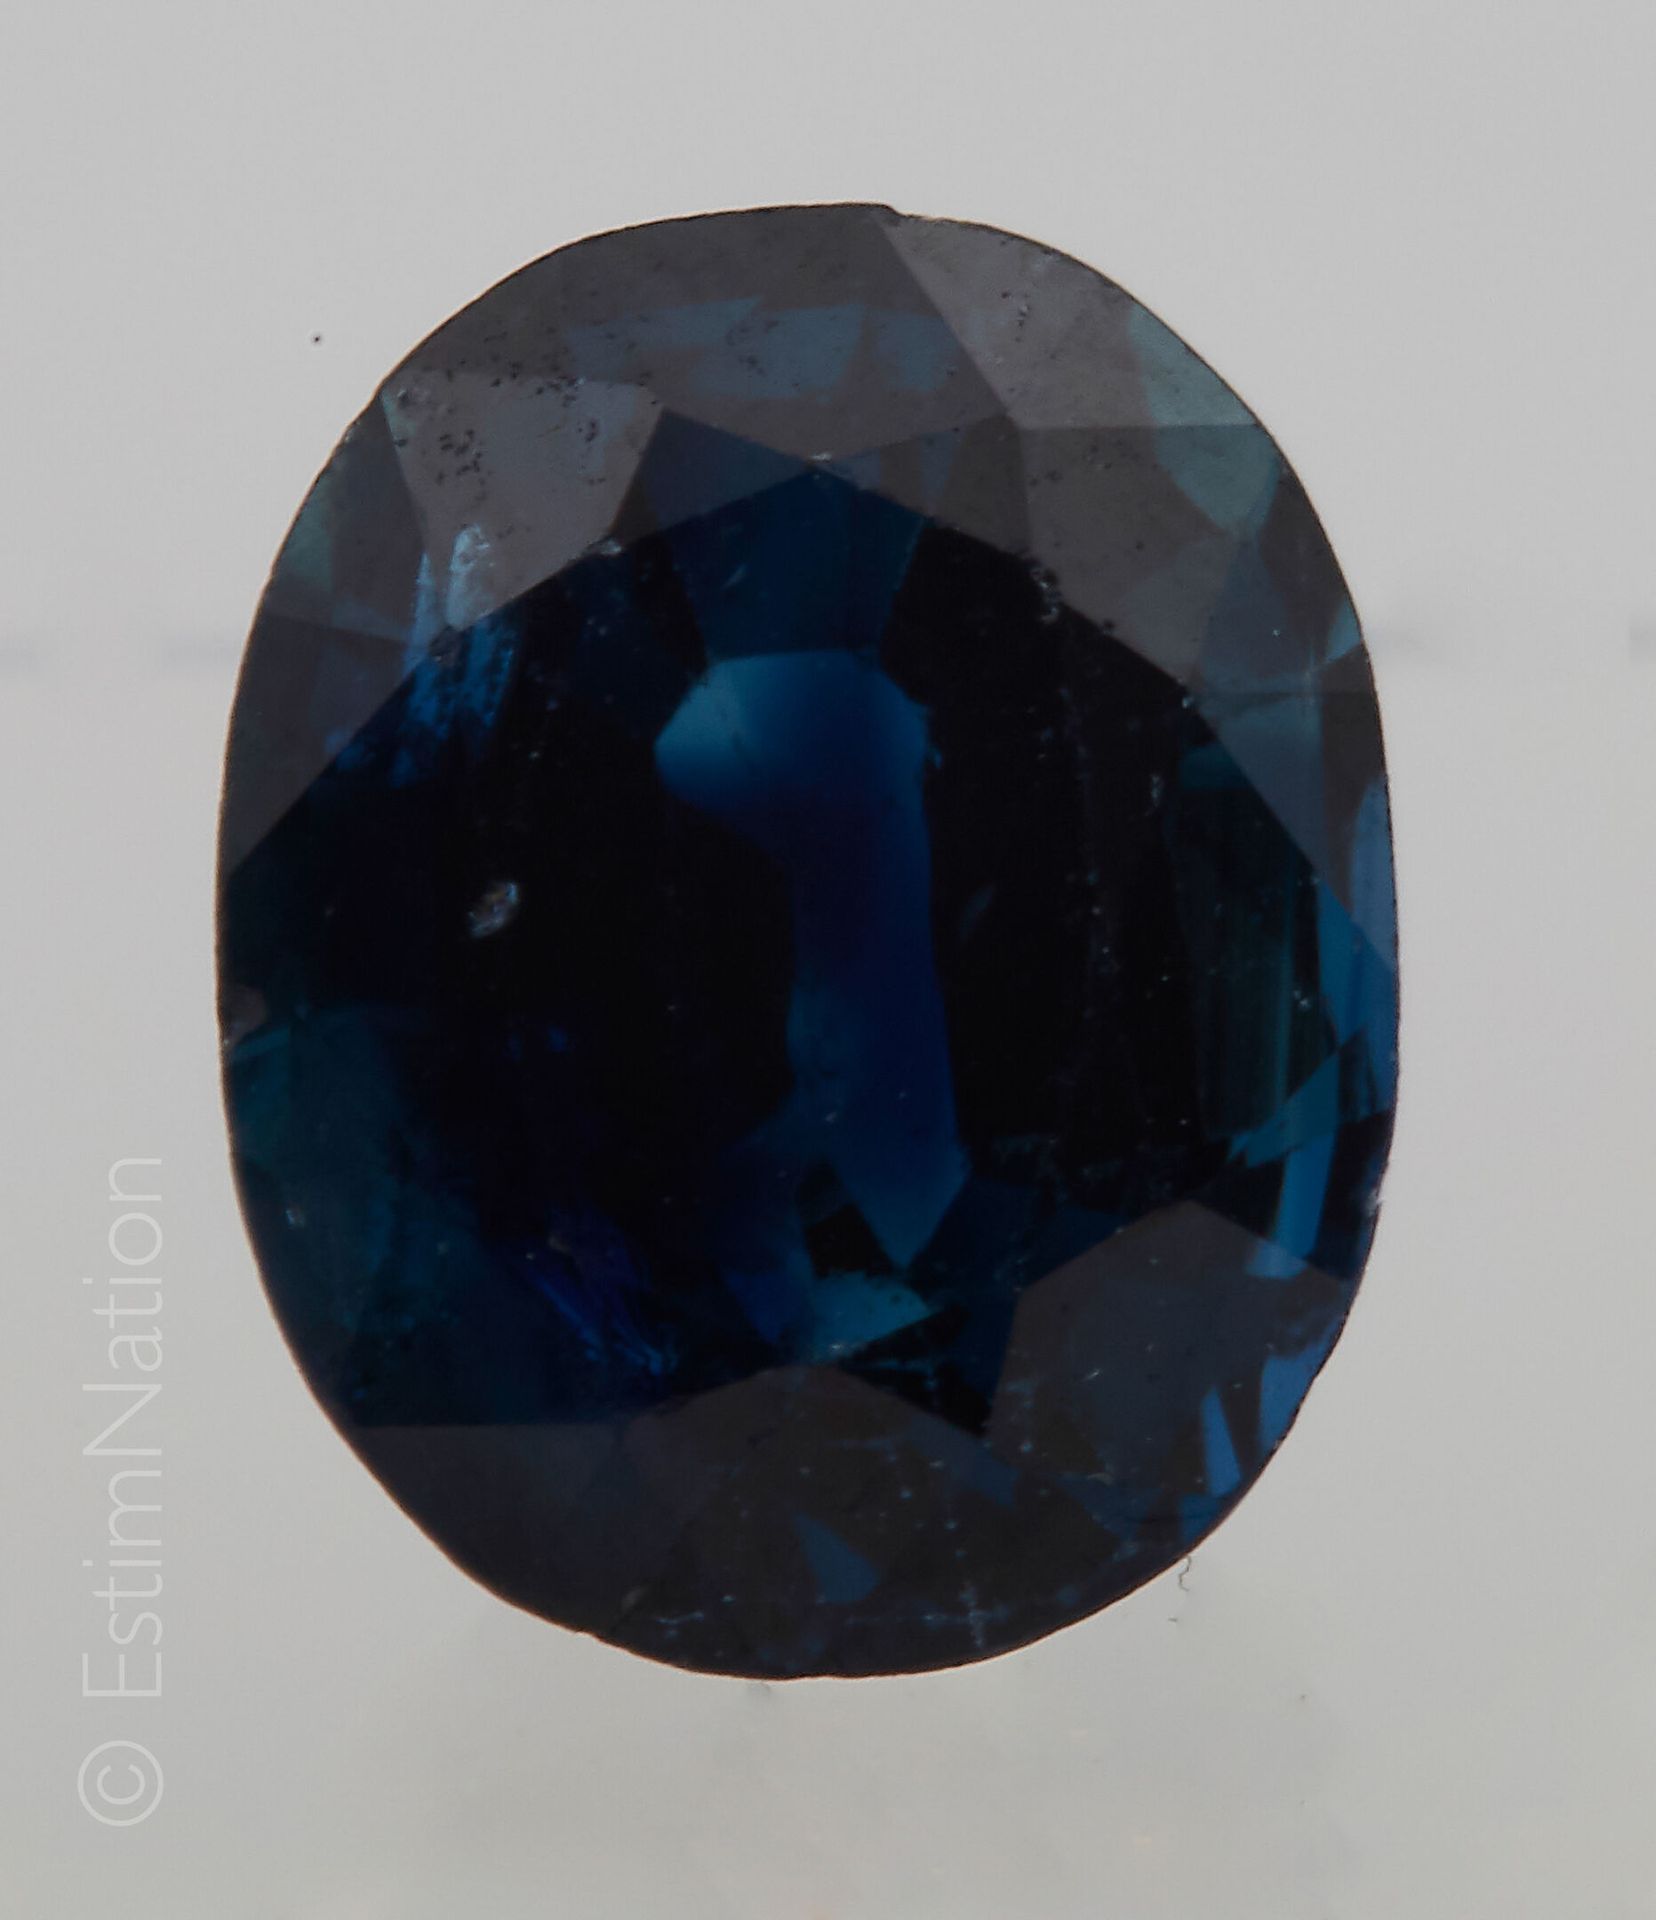 SAPHIR Faceted oval sapphire on paper

Dimensions : 7.25 x 5.75 x 4.00 mm approx&hellip;